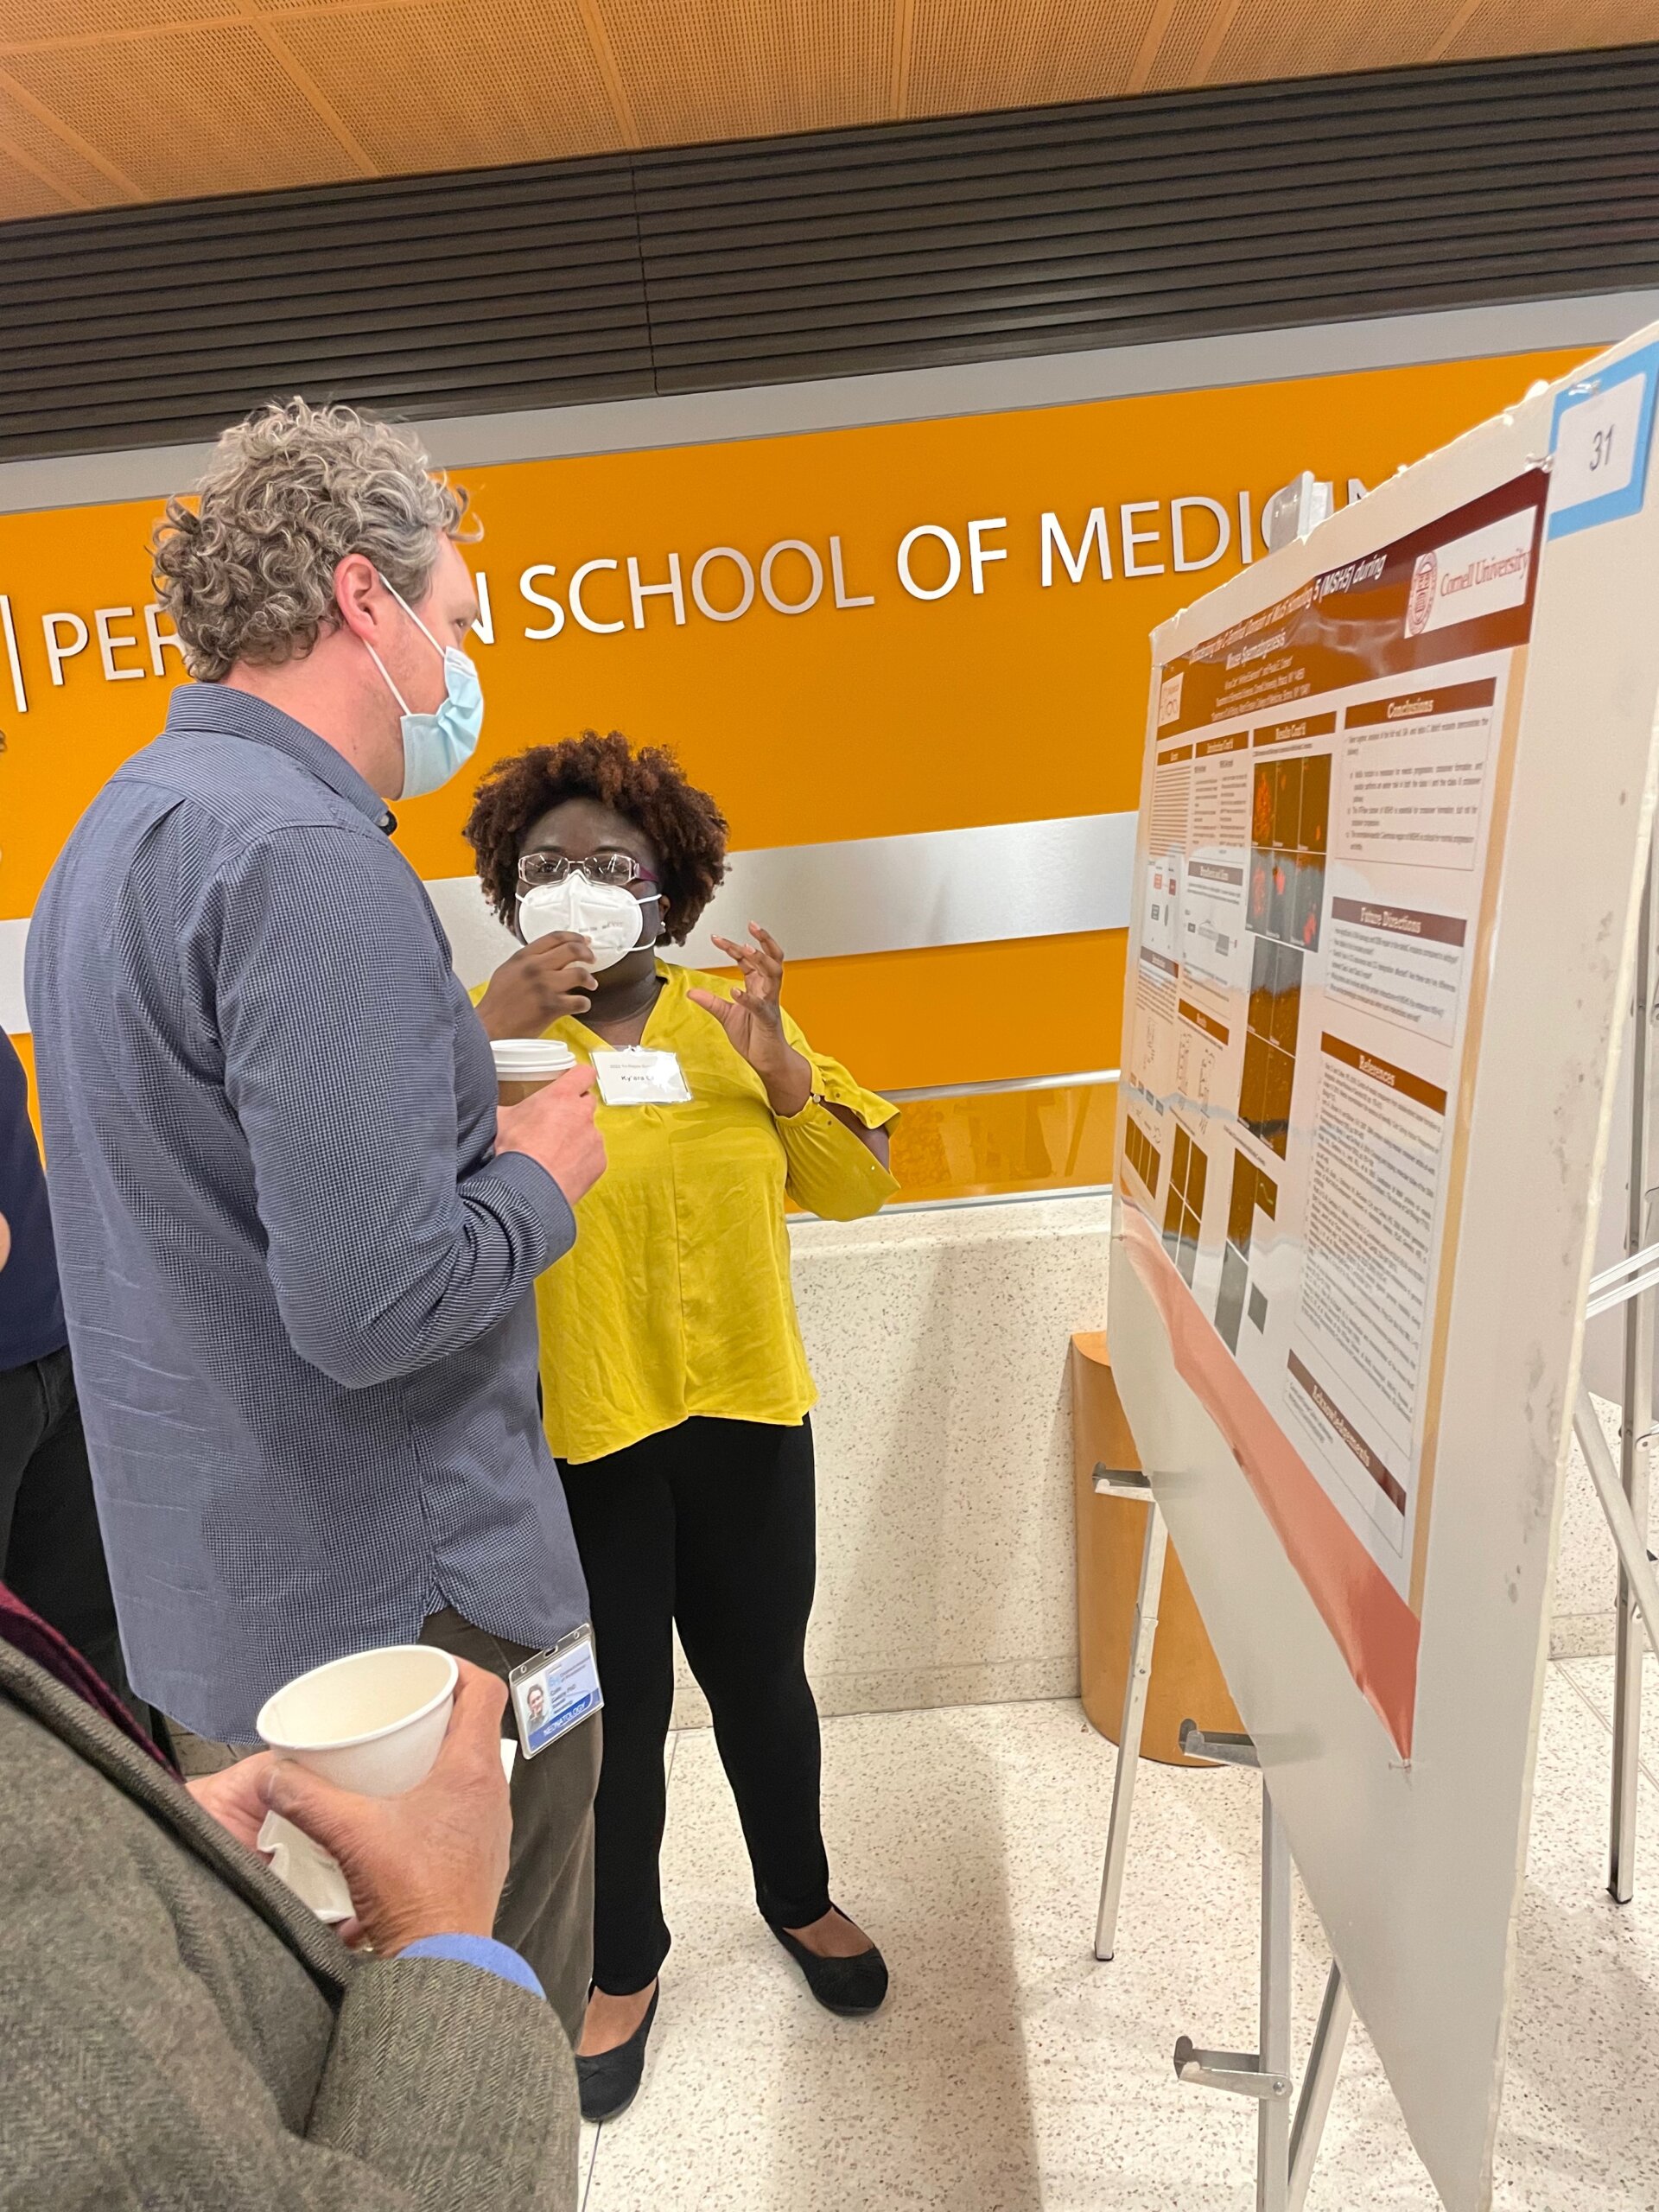 A Cornell graduate student describes her research results to a faculty member in front of her scientific poster display